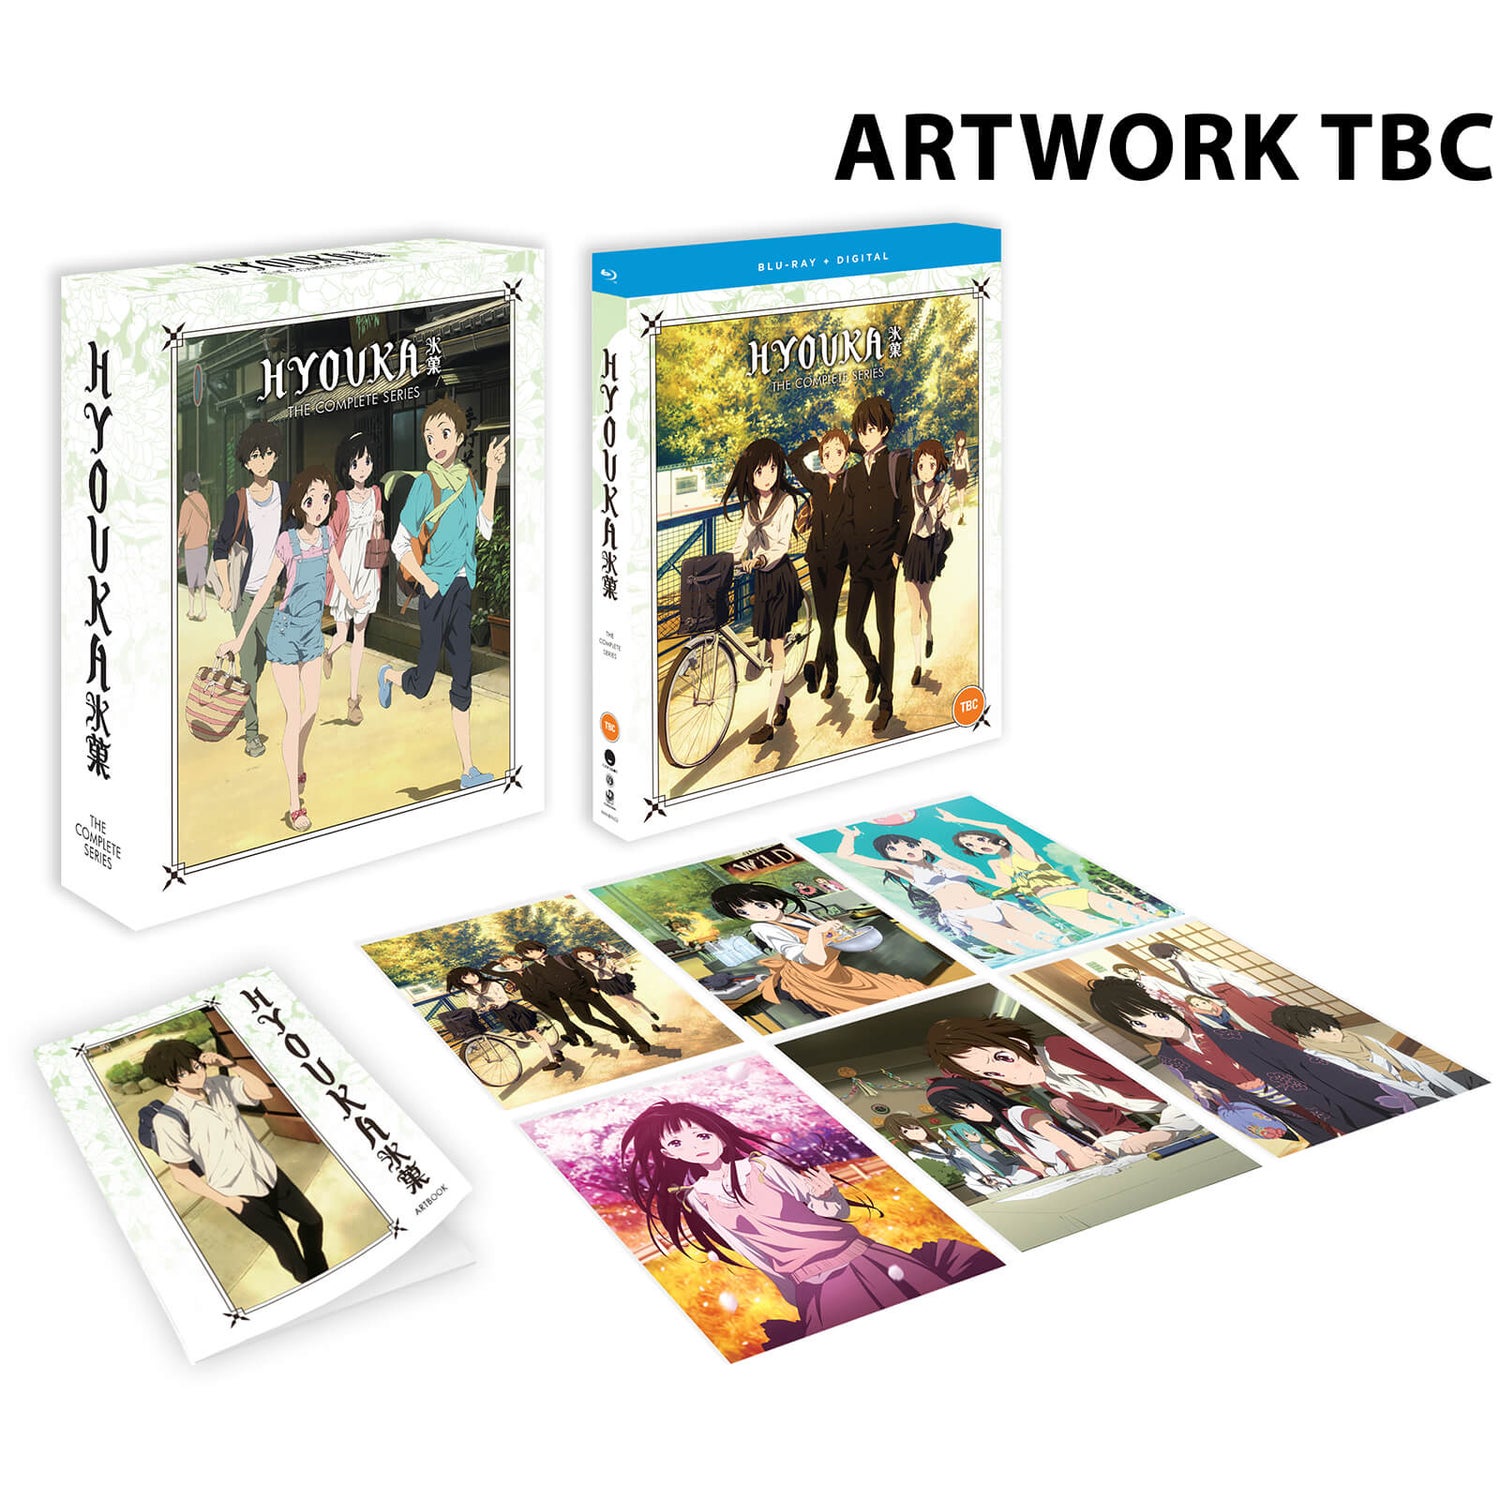 Hyouka The Complete Series Limited Edition + Digital copy